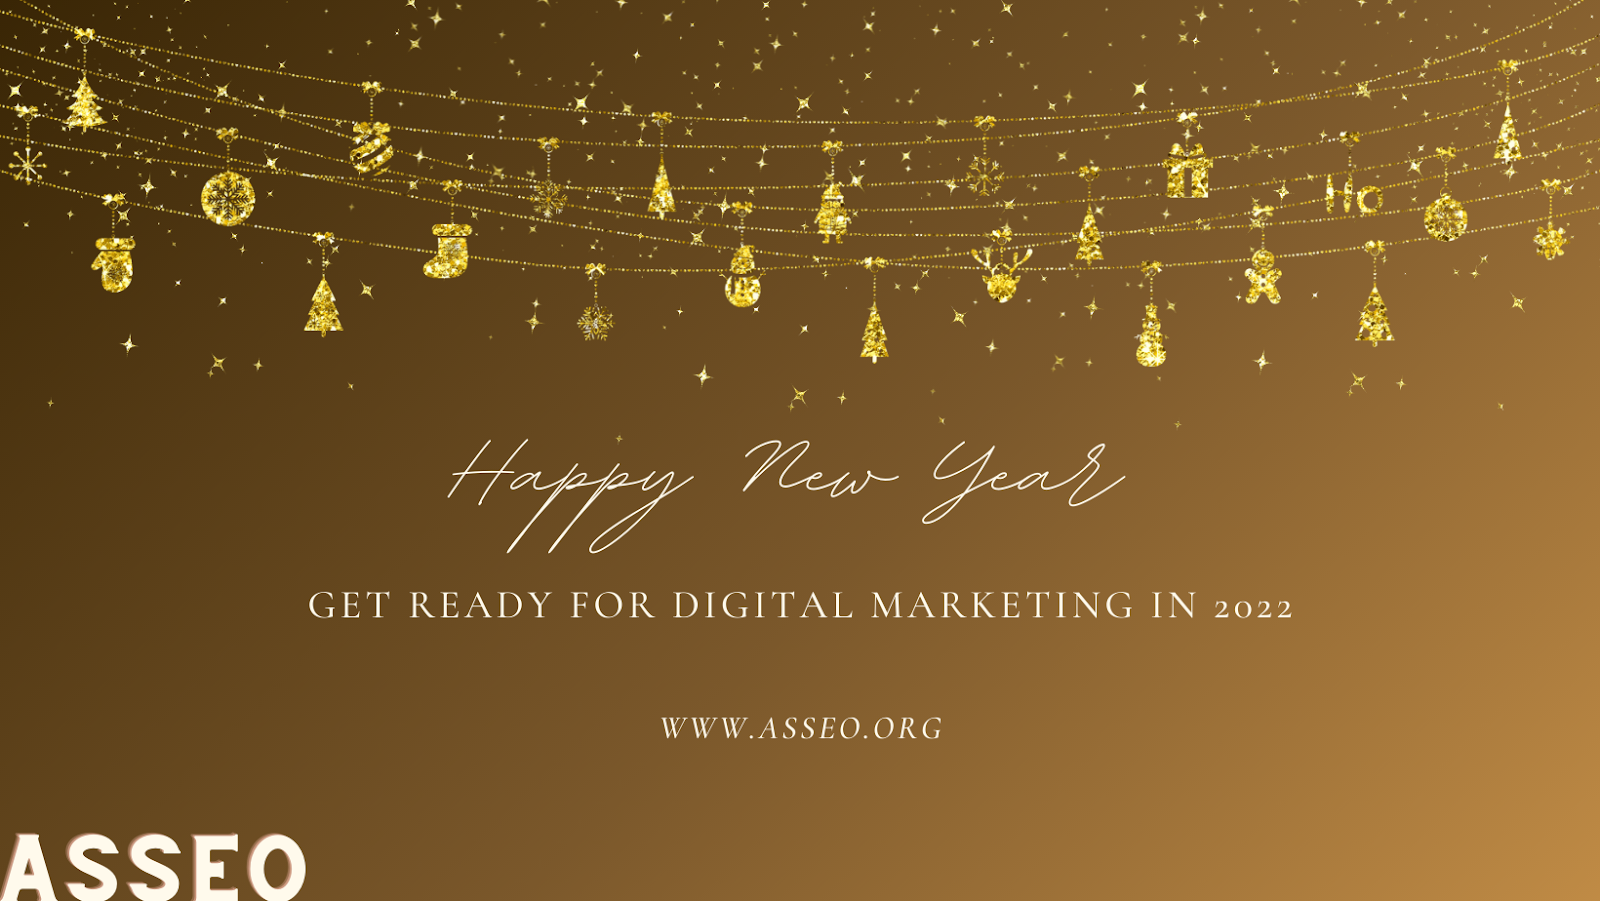 10 Ways to Get Ready for Digital Marketing in 2022